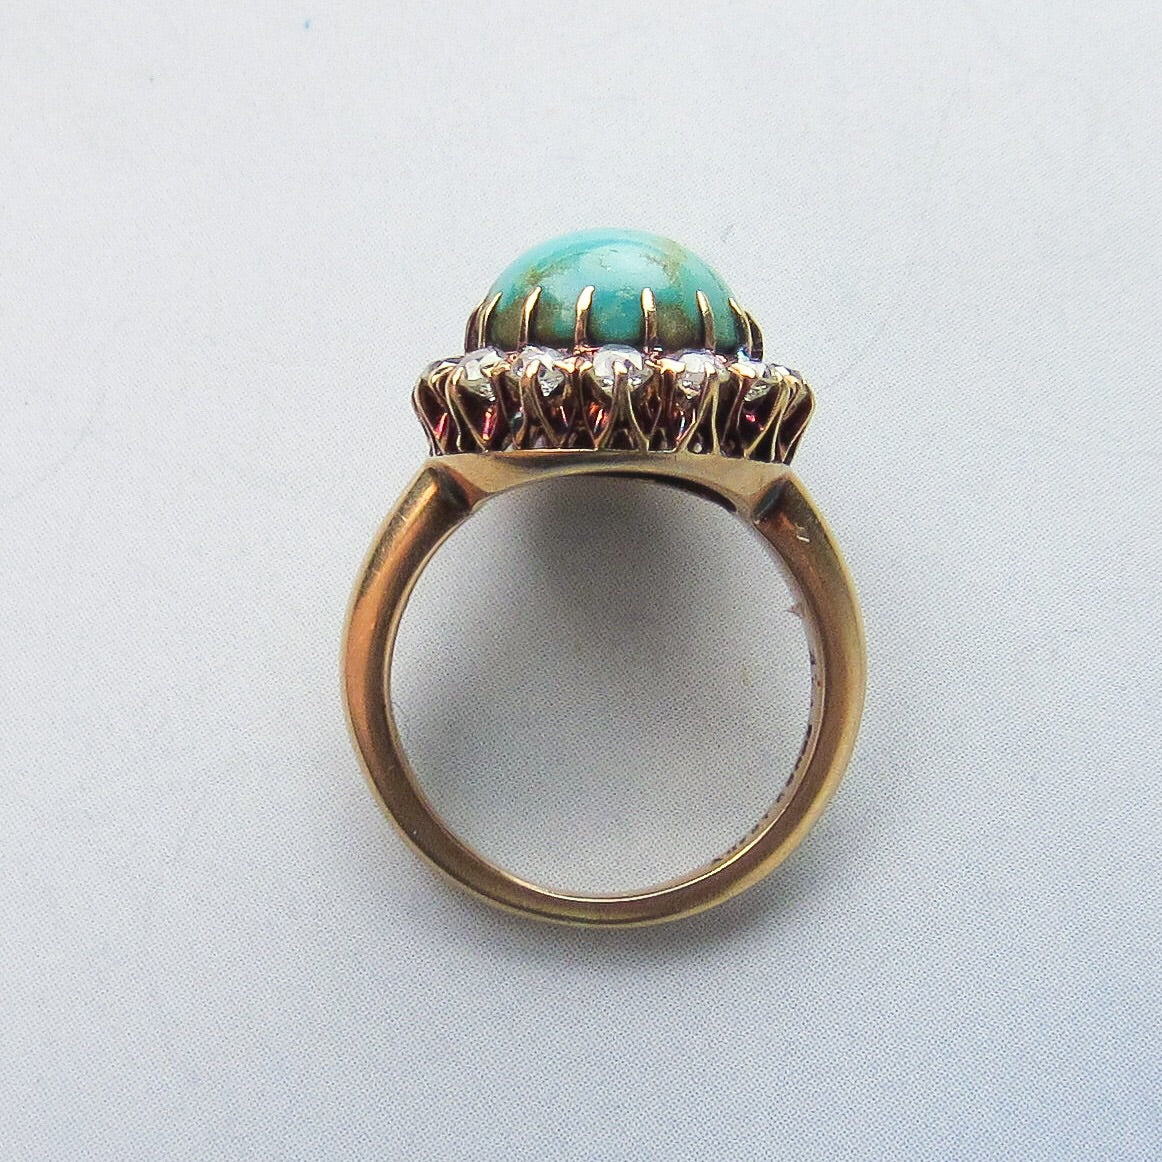 SOLD--Edwardian Turquoise and Diamond Cluster Ring 14k c. 1900